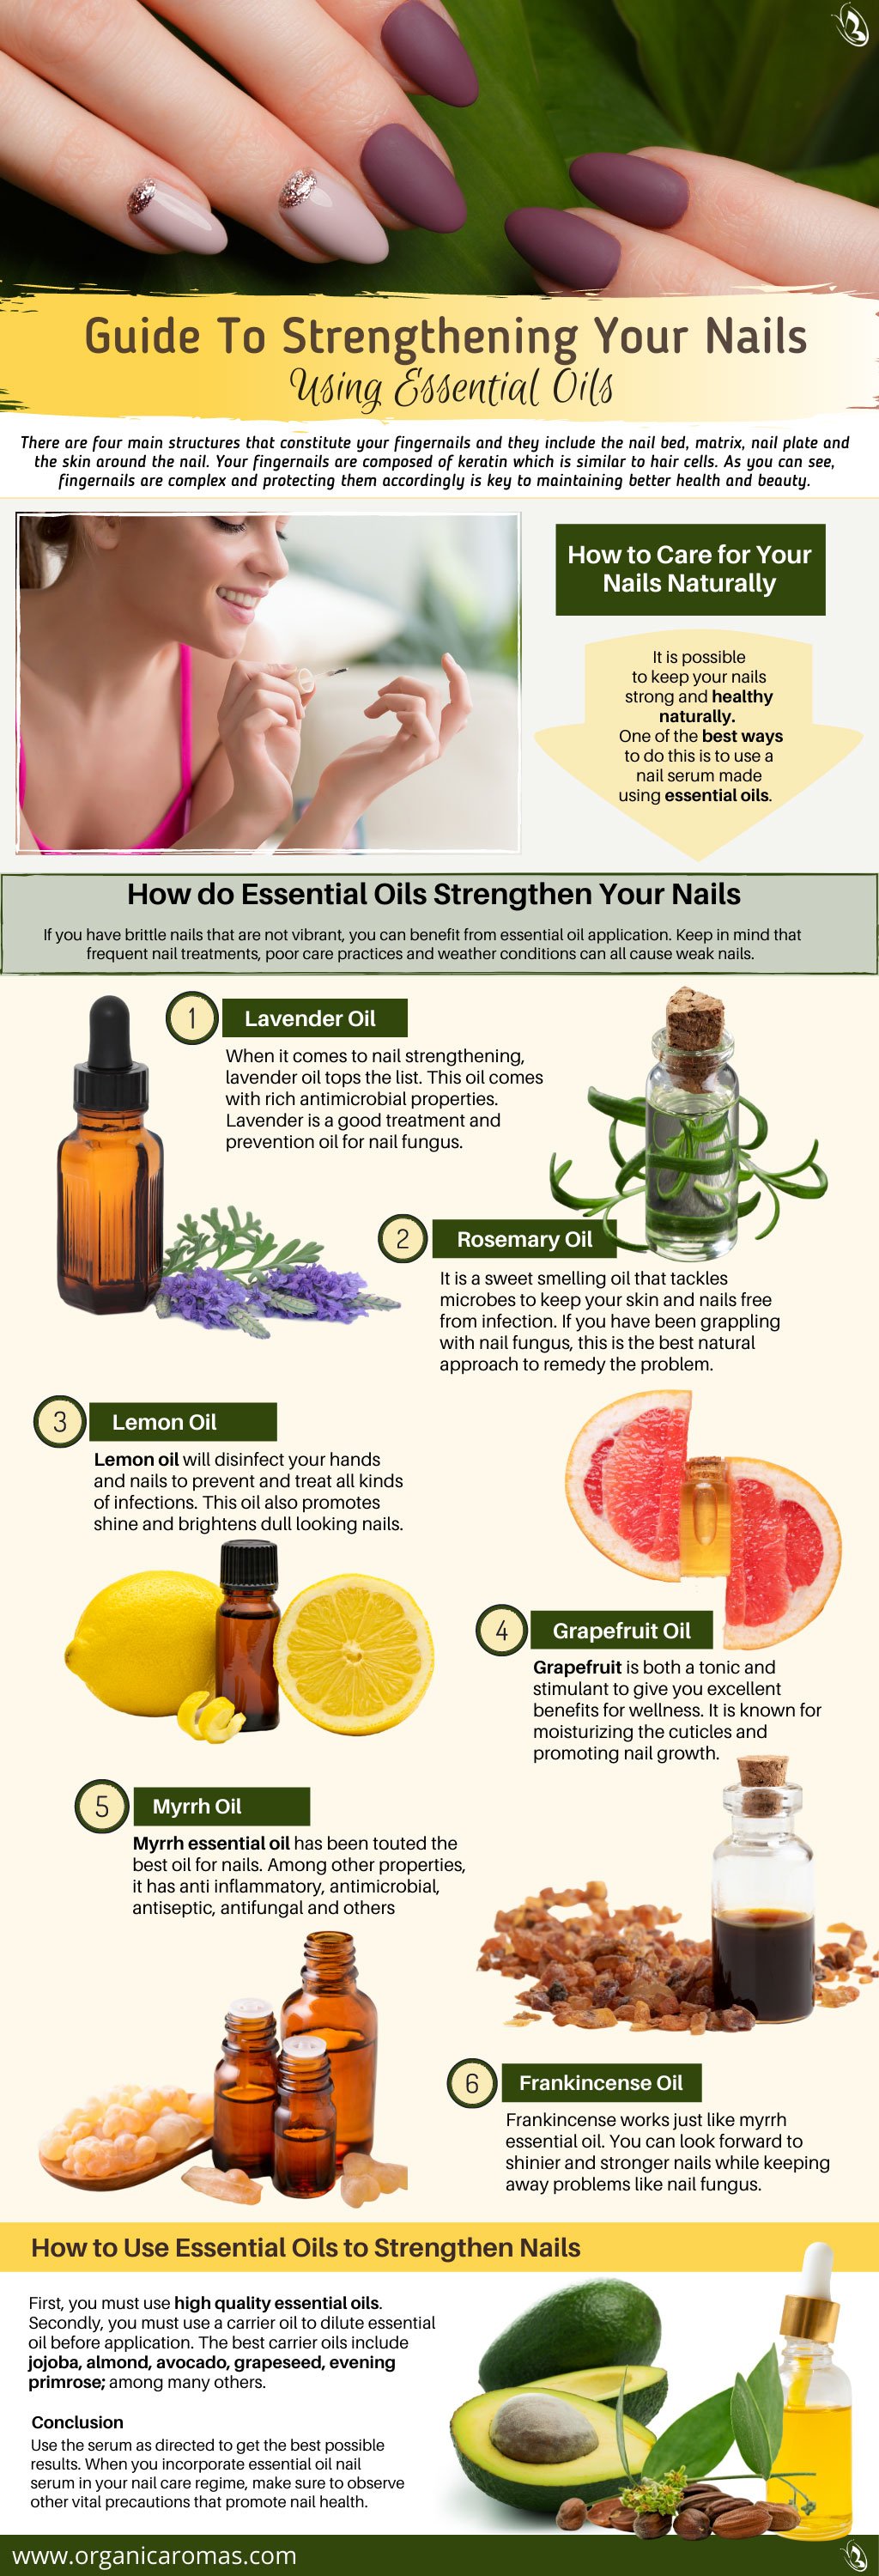 Best oils for nails | Nail oil, Nail care tips, Oils for skin